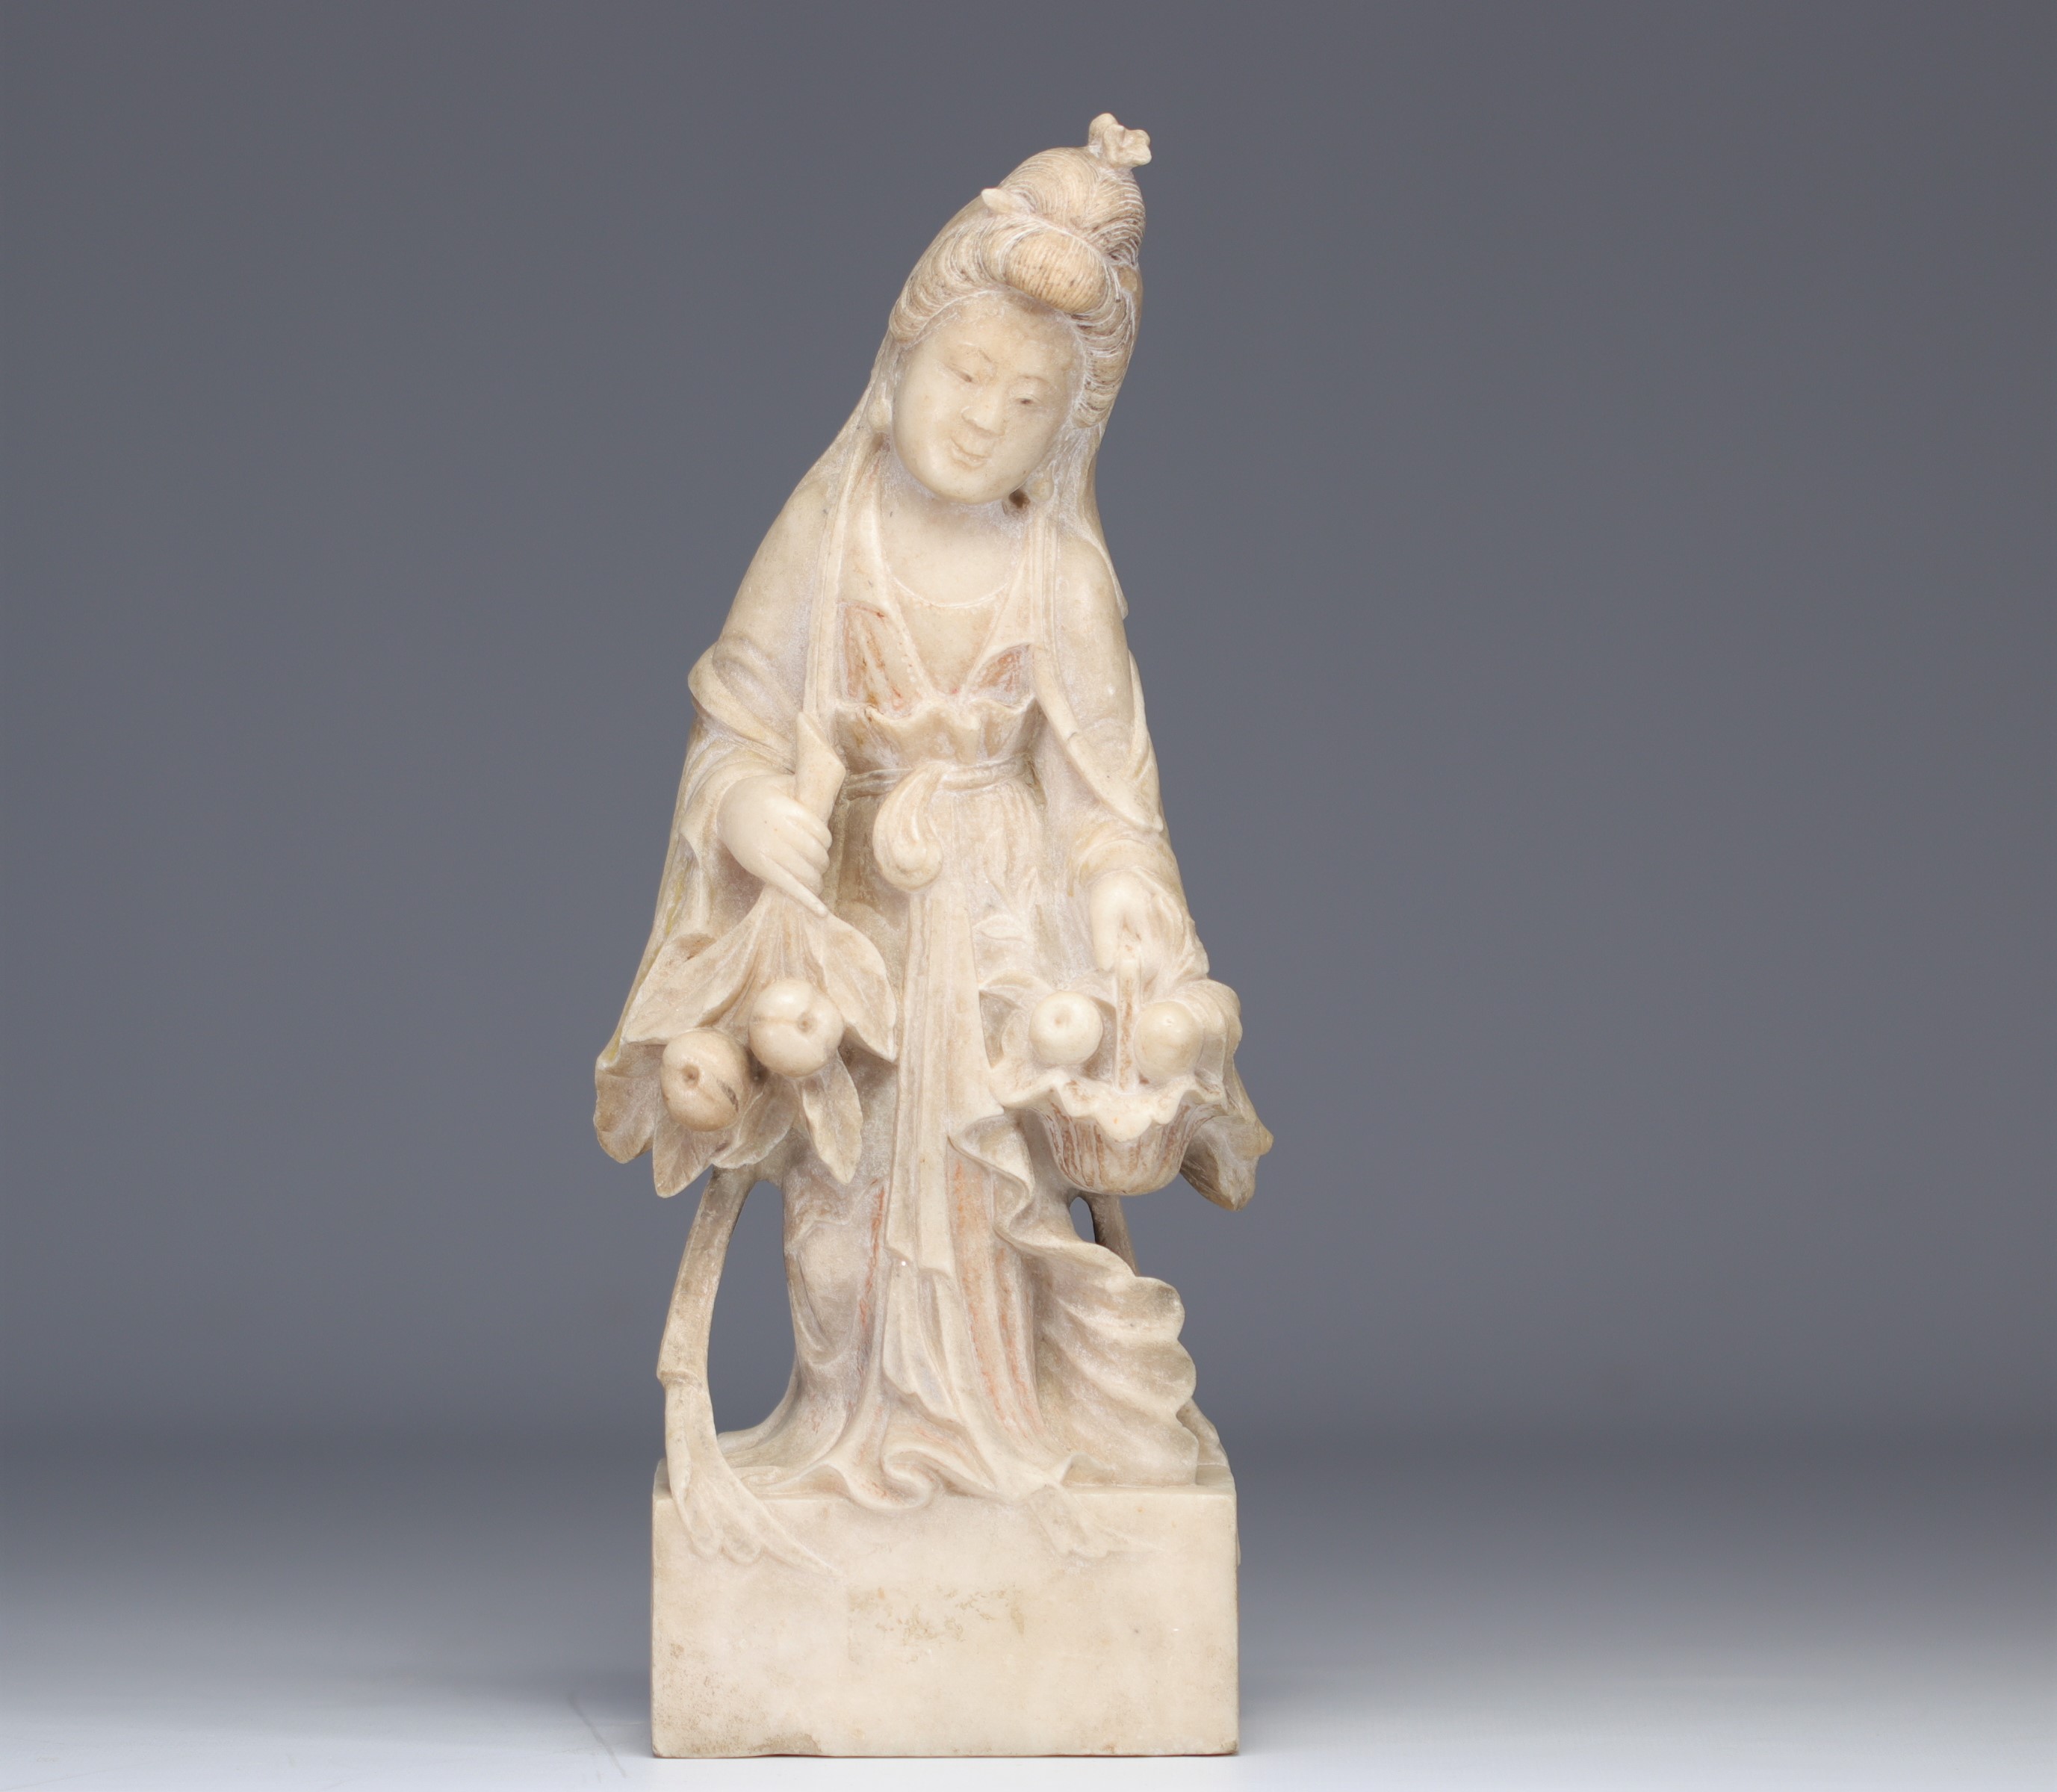 Marble sculpture of a young woman with fruit probably from the Ming period (æ˜Žæœ)